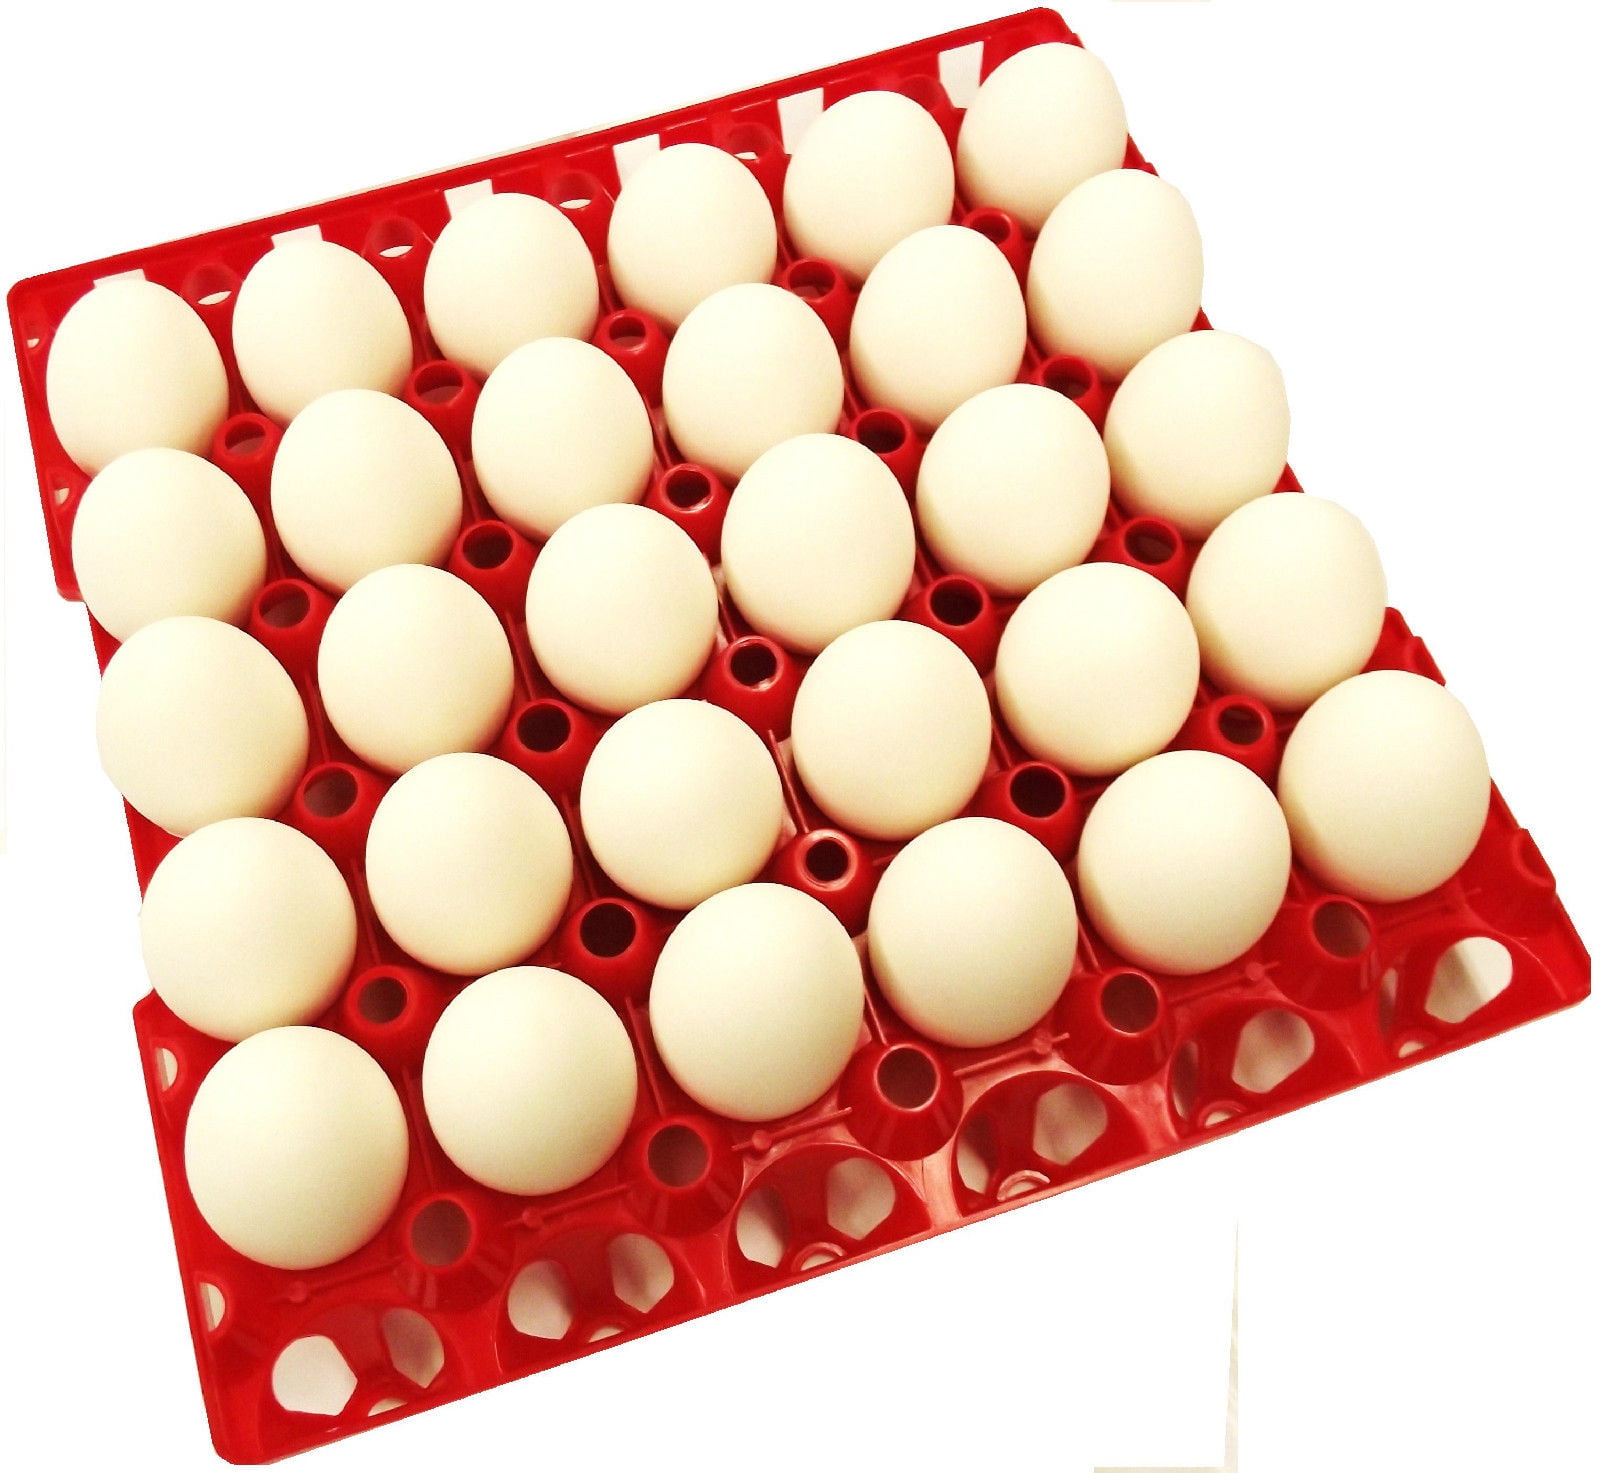 Silicone 30 Eggs Setting Tray, For Poultry Farms, Size: 1.5 X 1 Feet